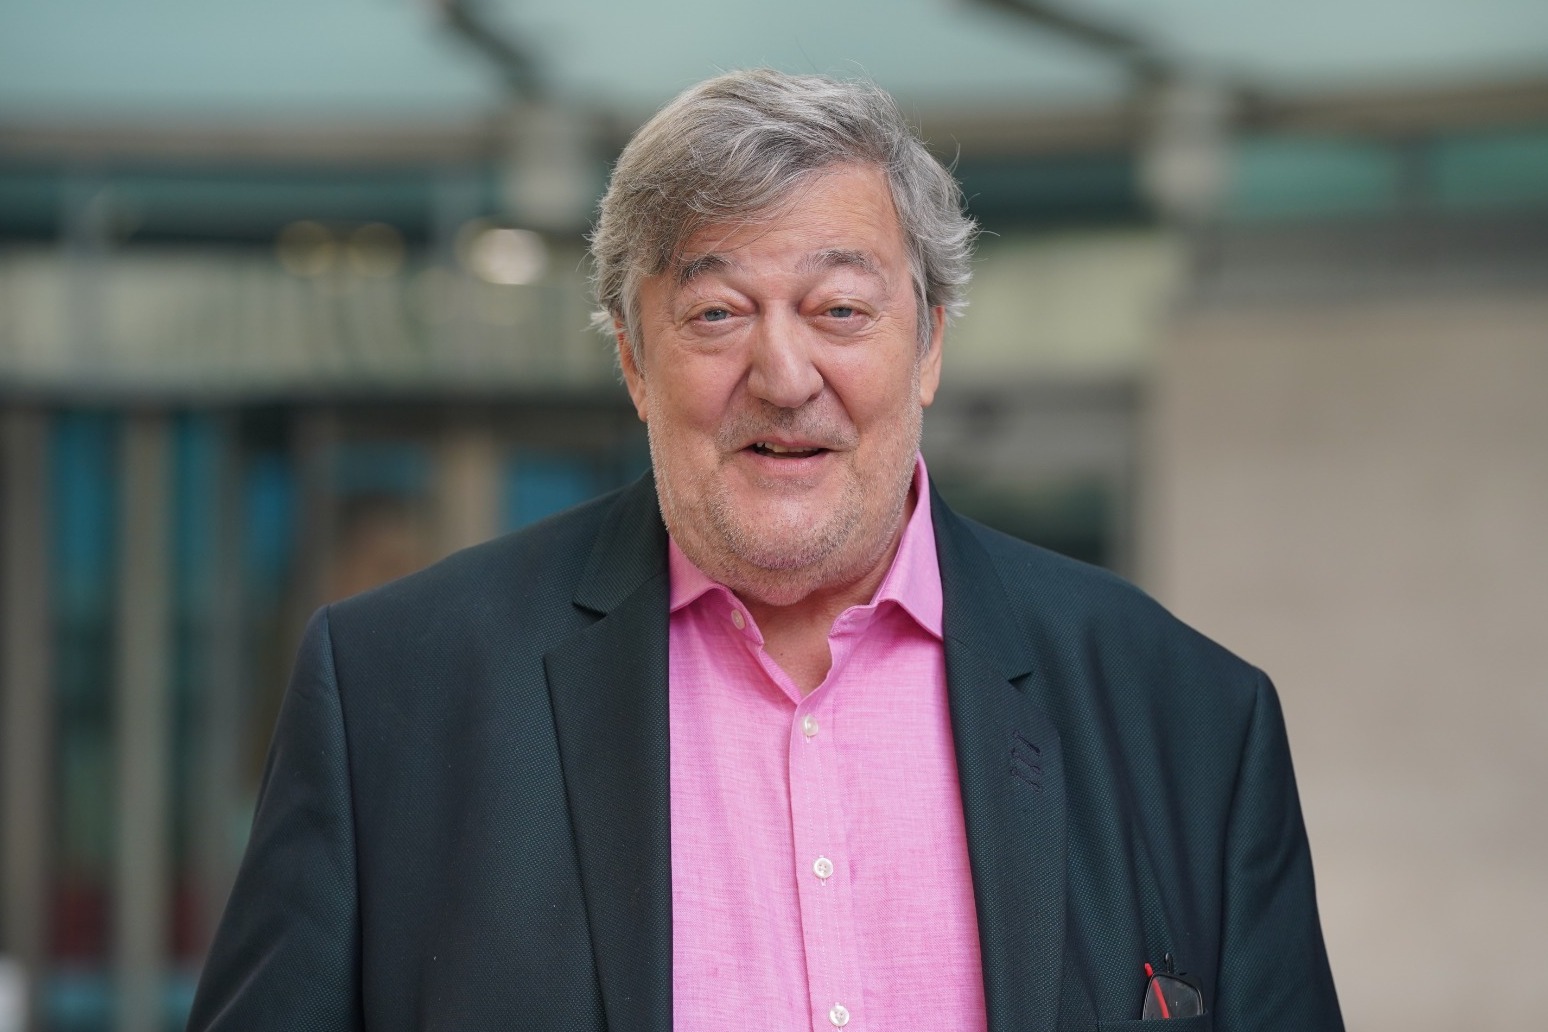 Stephen Fry leads celebrities backing cancer campaign